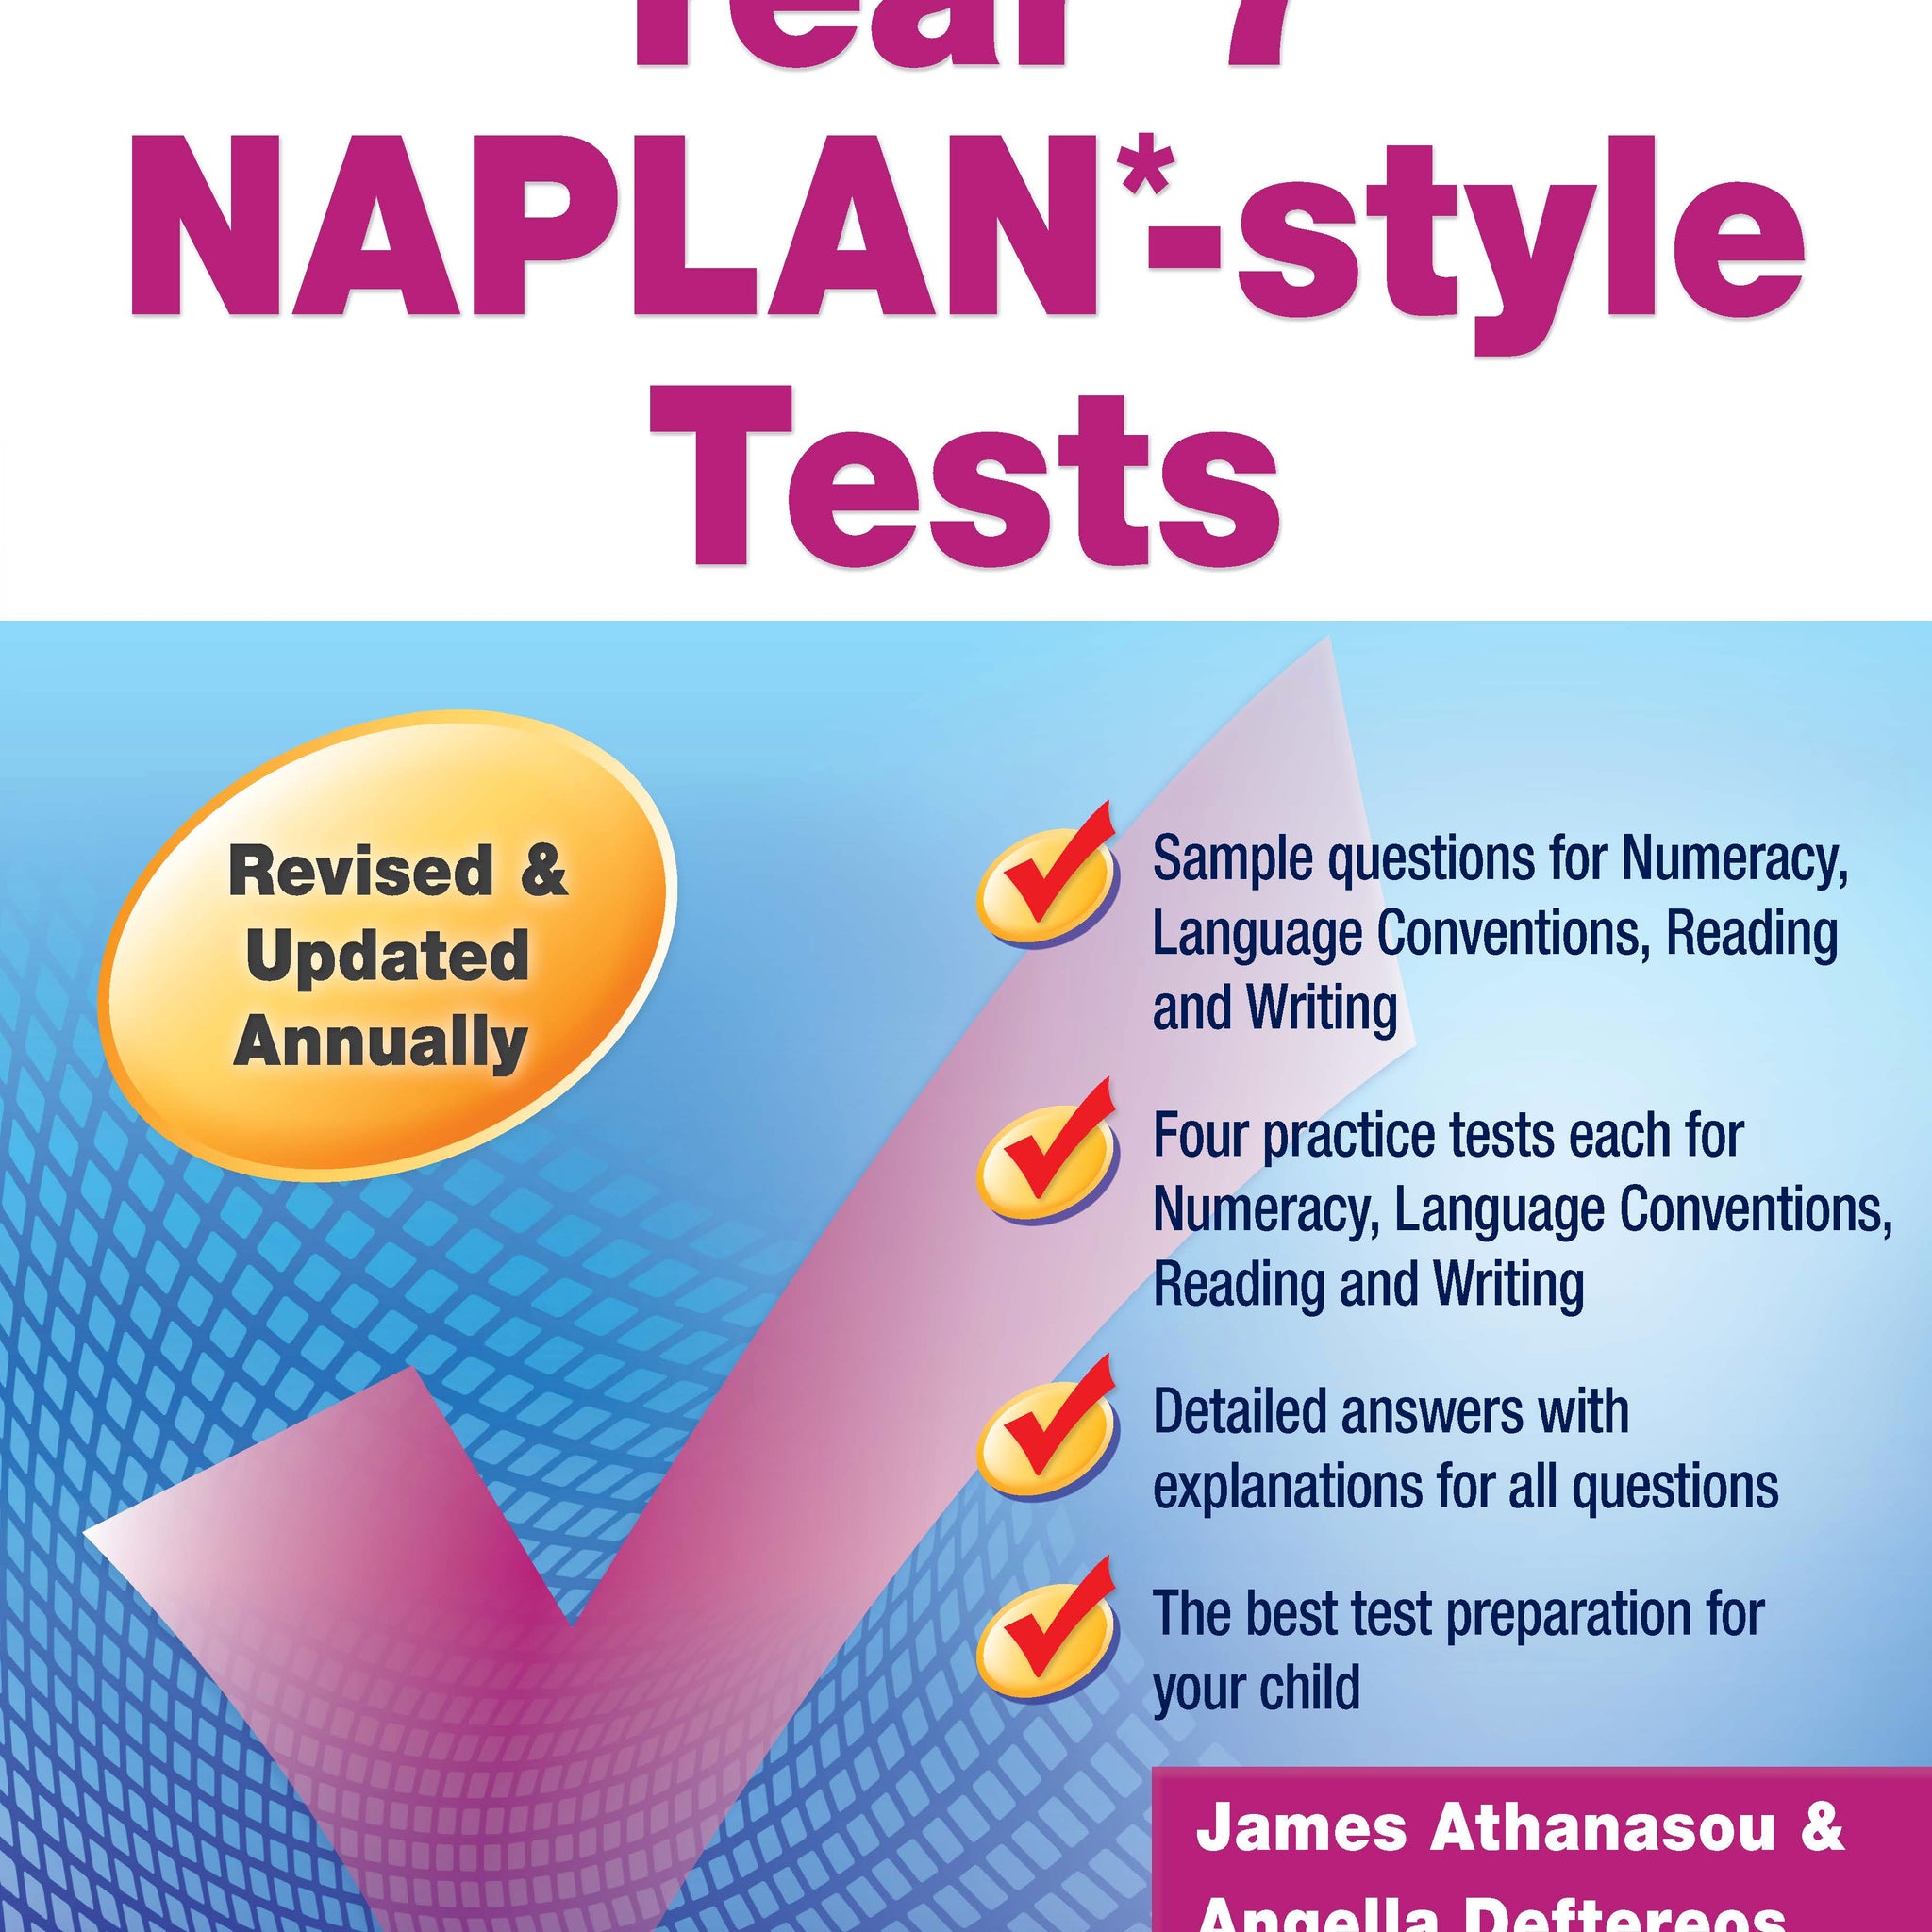 Excel NAPLAN*-style Tests Year 7